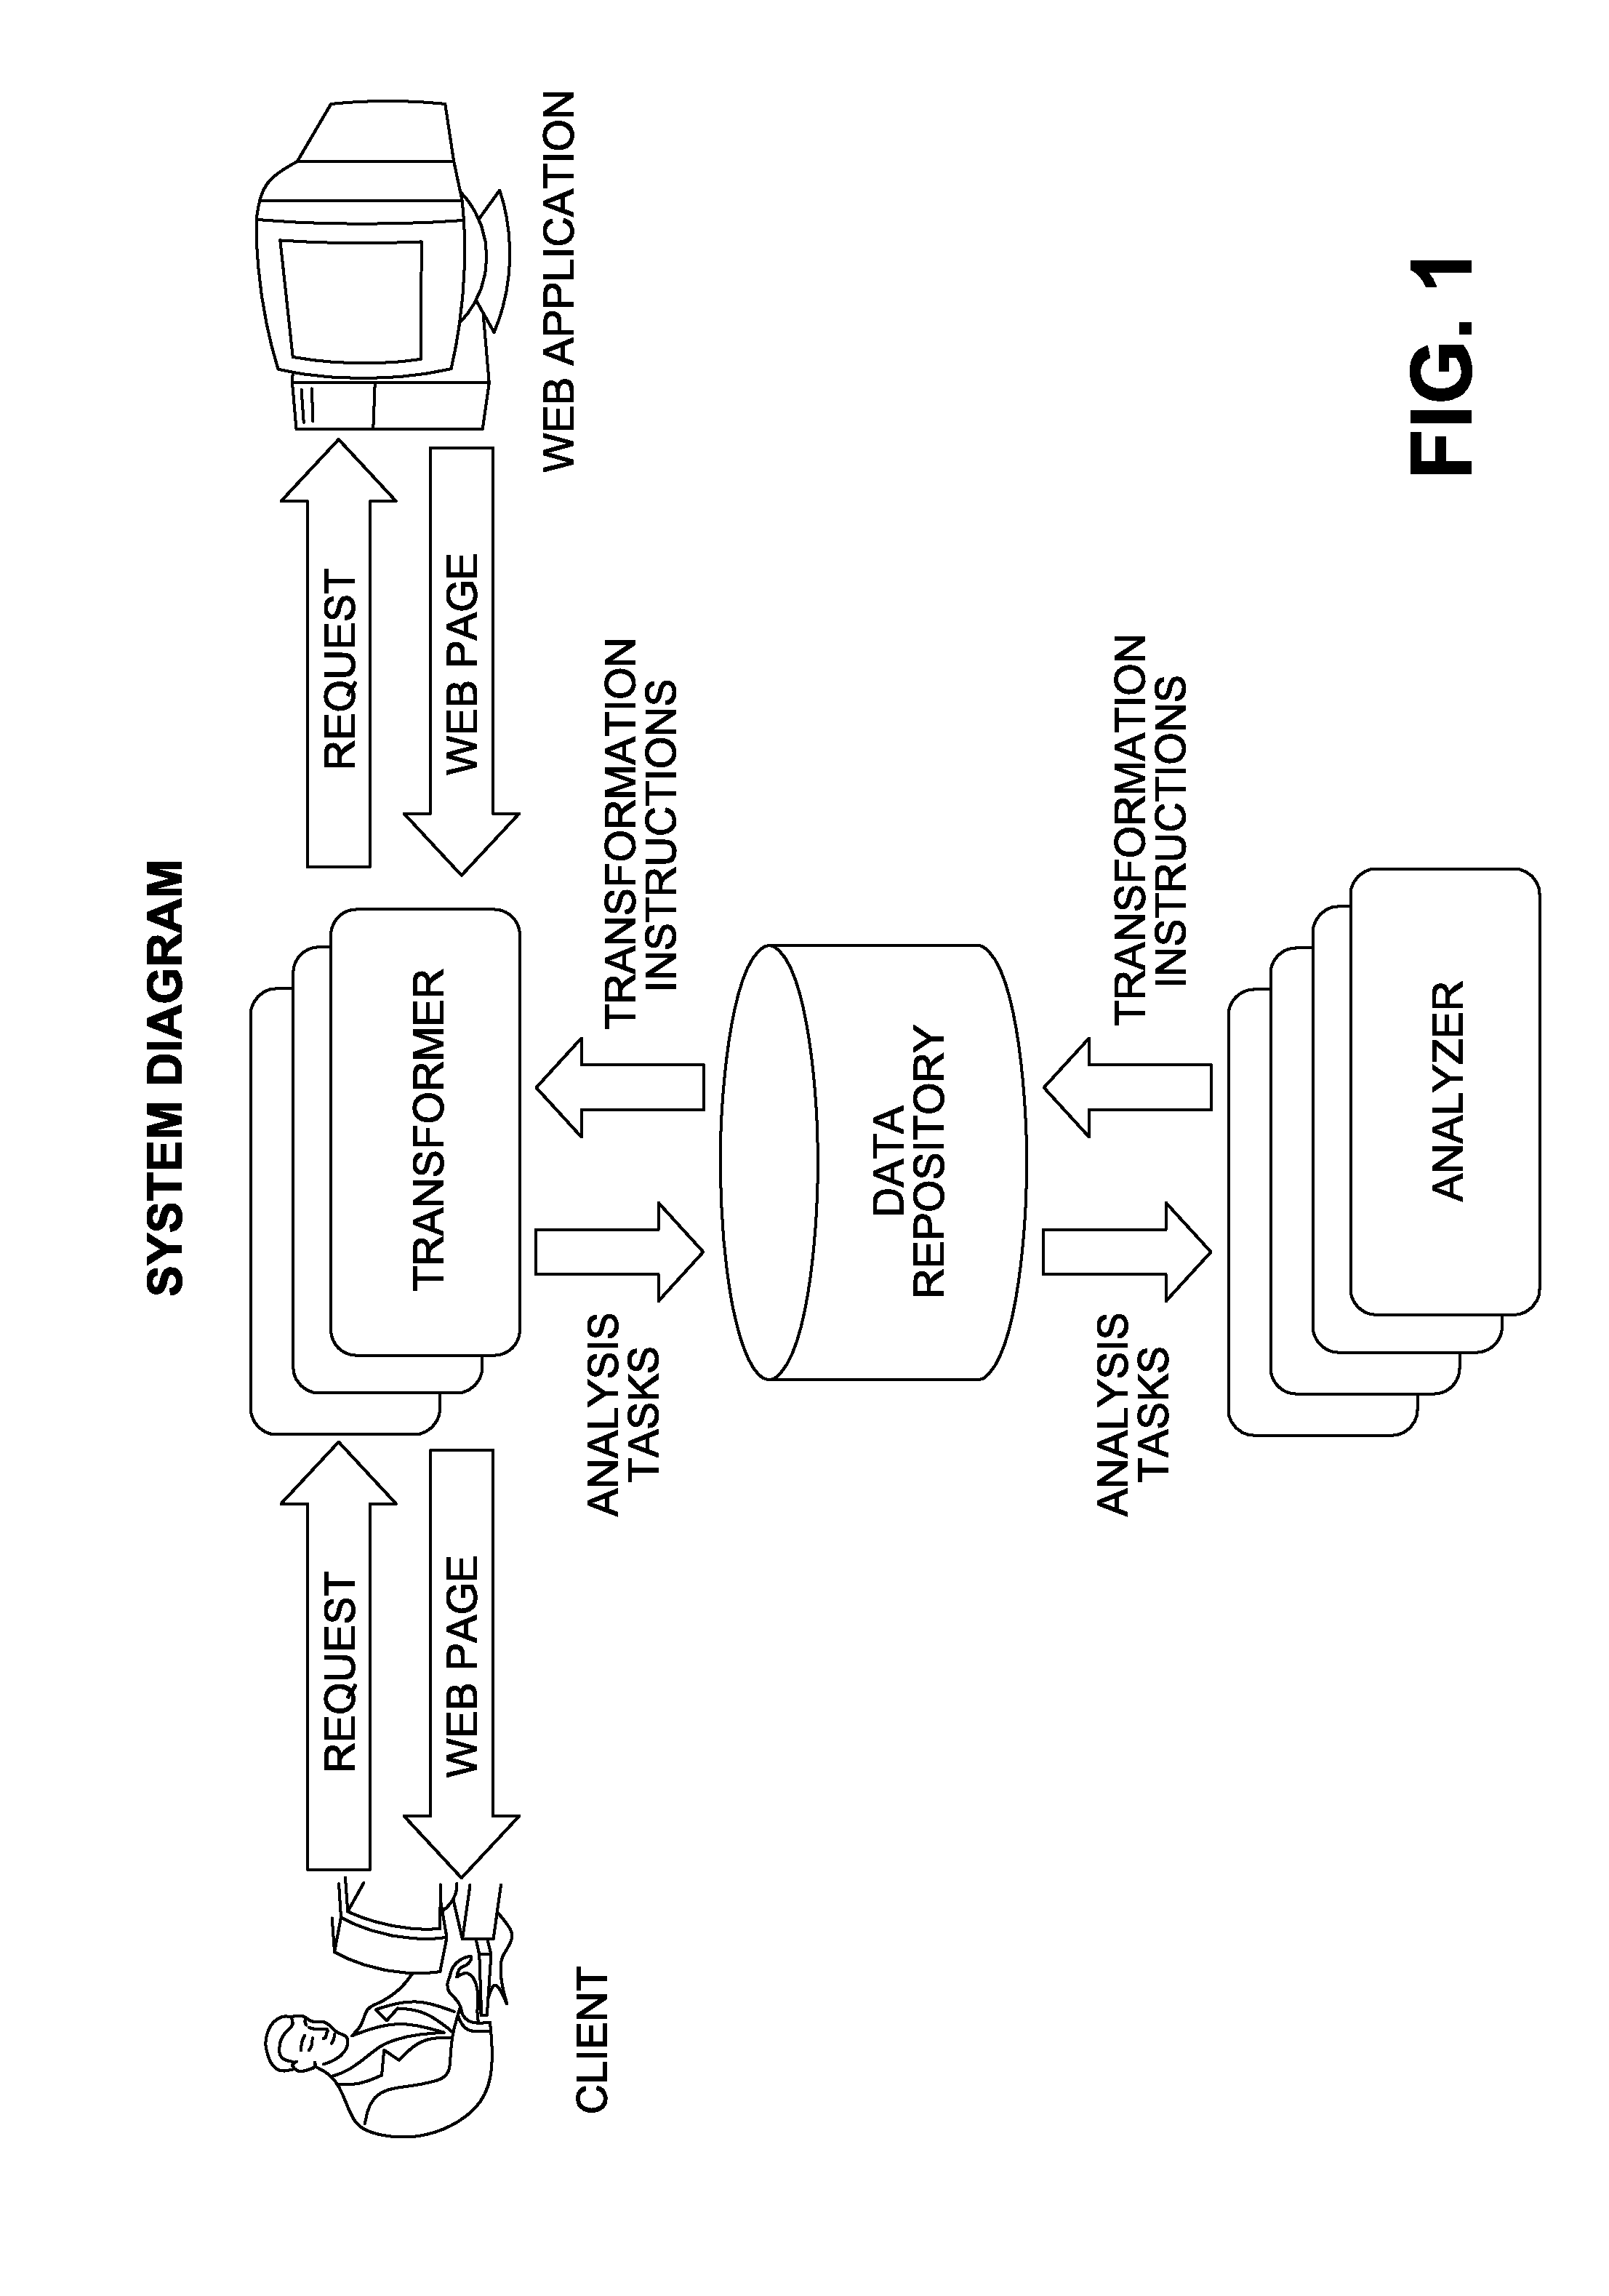 Method and system for automated analysis and transformation of web pages